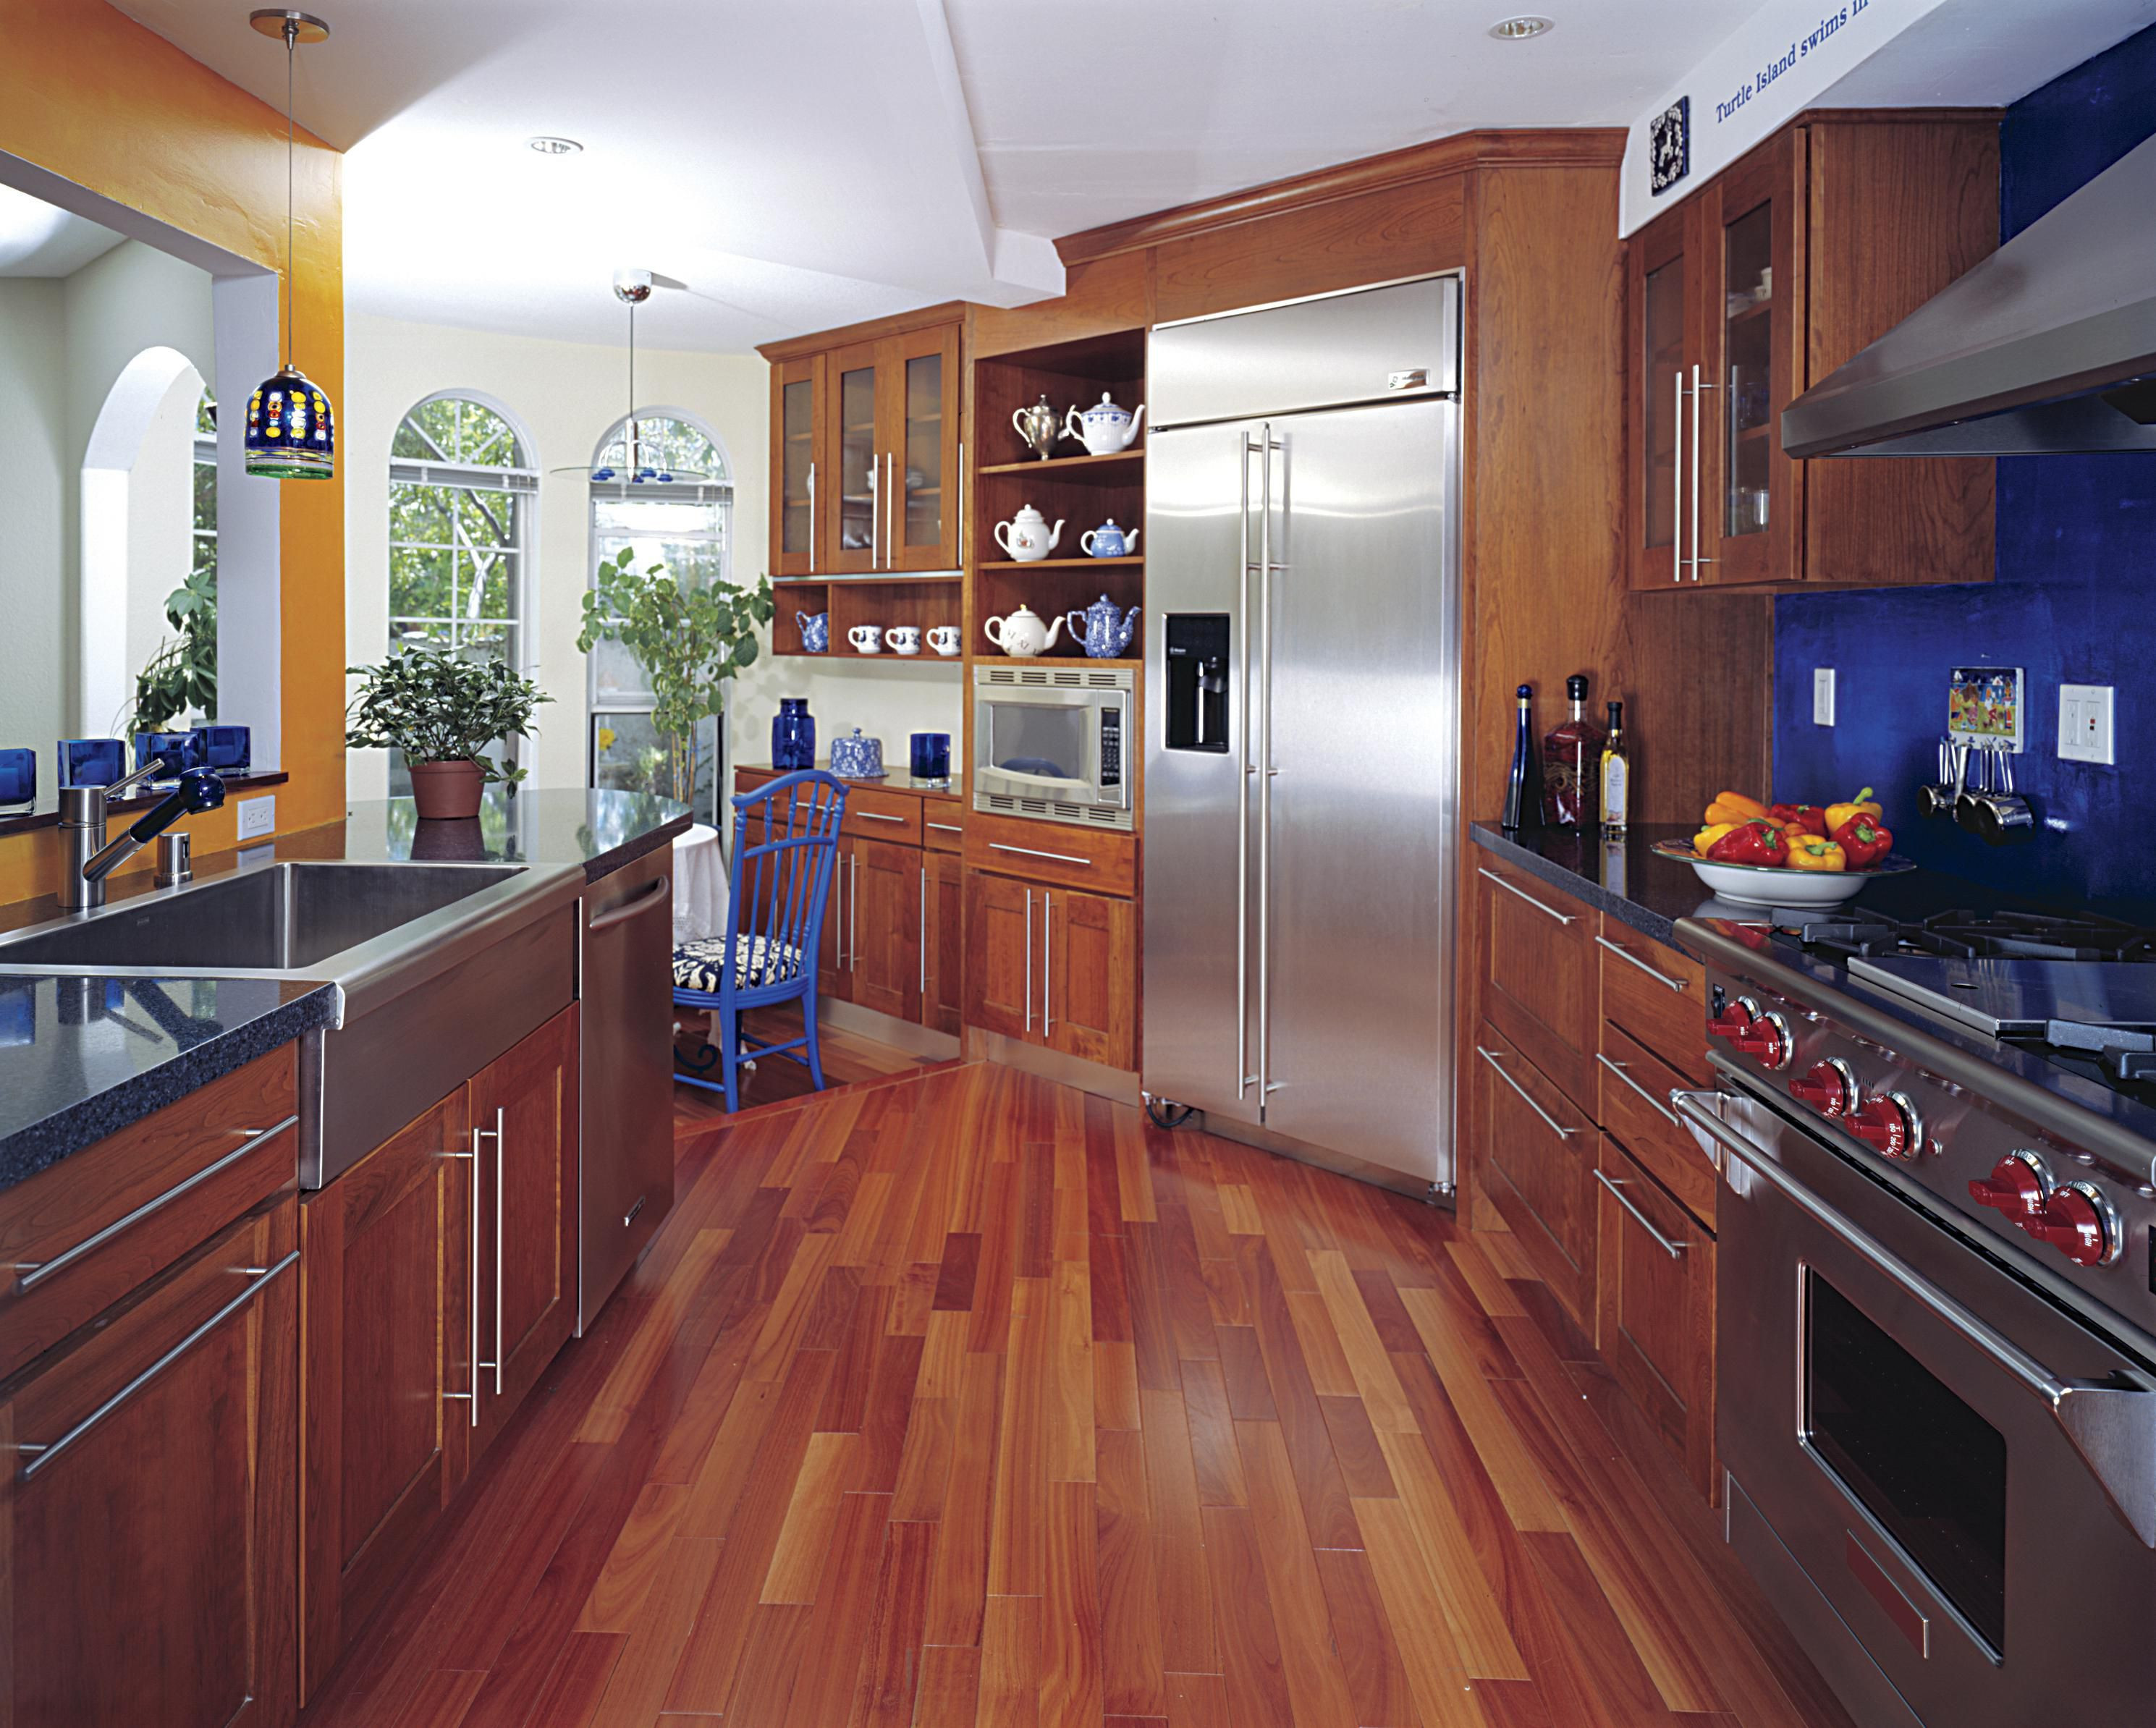 15 Unique 3 4 Inch Hardwood Flooring 2024 free download 3 4 inch hardwood flooring of hardwood floor in a kitchen is this allowed pertaining to 186828472 56a49f3a5f9b58b7d0d7e142